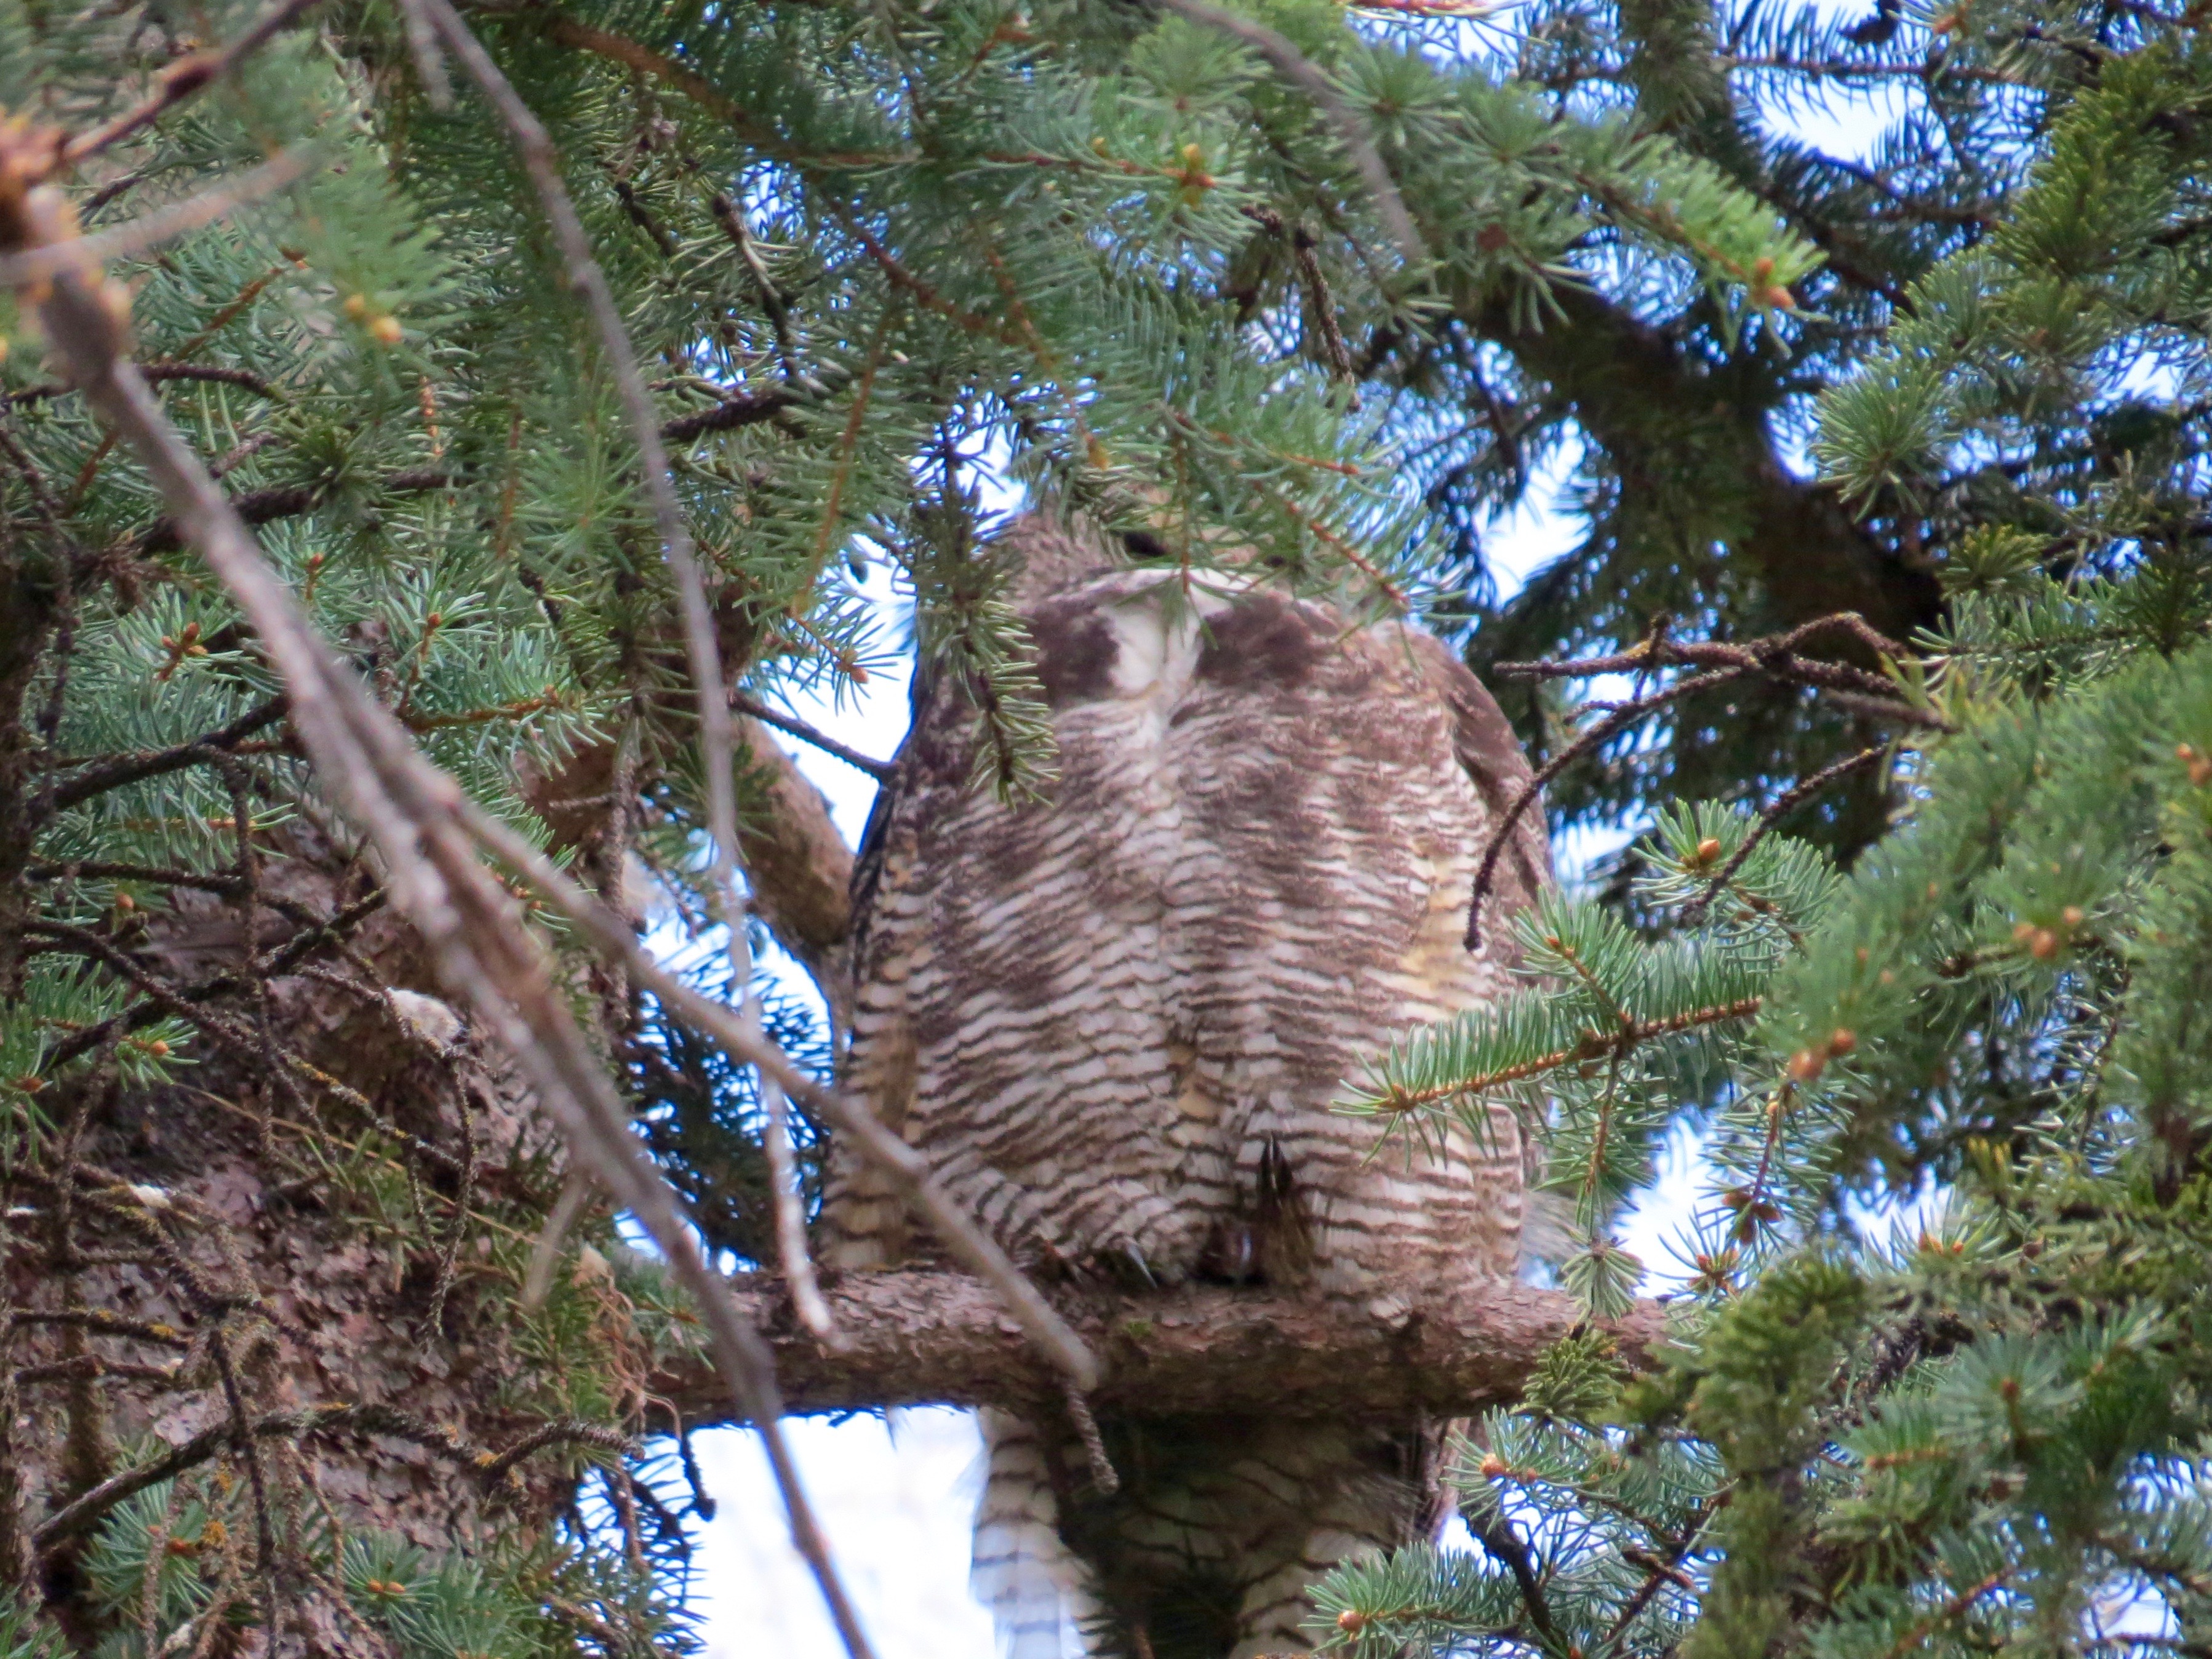 When I took this photo, I hoped to get a shot of Mama Owl "at rest." She's sleeping. What I didn't realize is that the  male owl is behind her,  guarding her and the baby in the nest to the left.